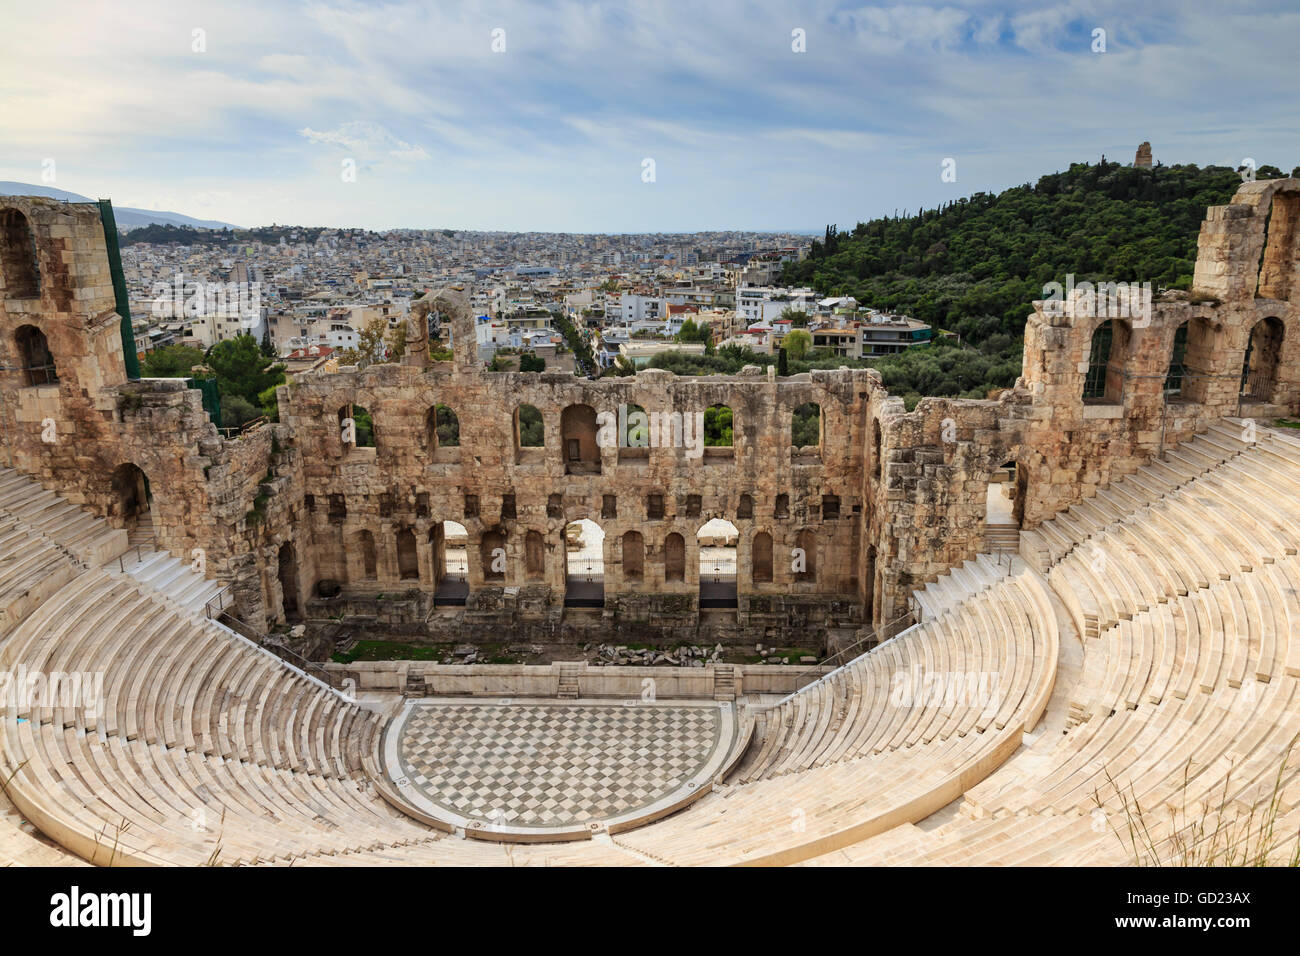 Theatre of Herod Atticus below the Acropolis with the Hill of Philippapos and city view, Athens, Greece, Europe Stock Photo